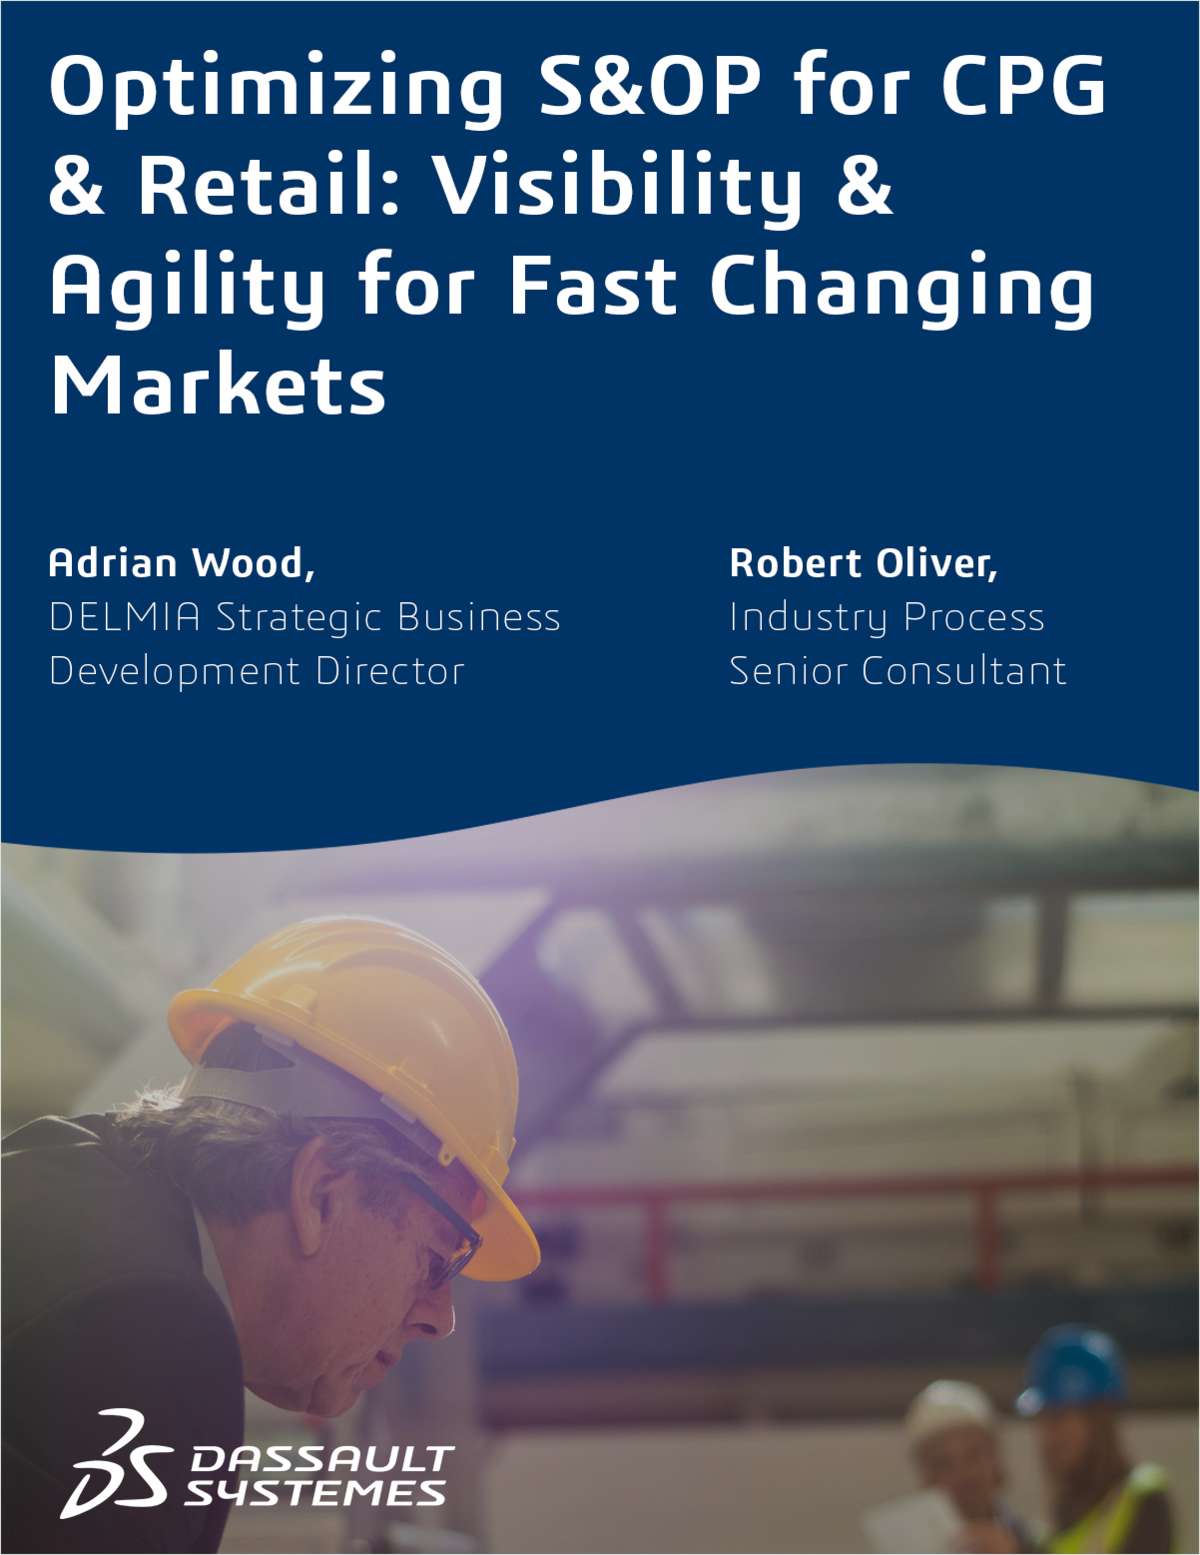 Optimizing S&OP For CPG & Retail: Visibility & Agility For Fast Changing Markets